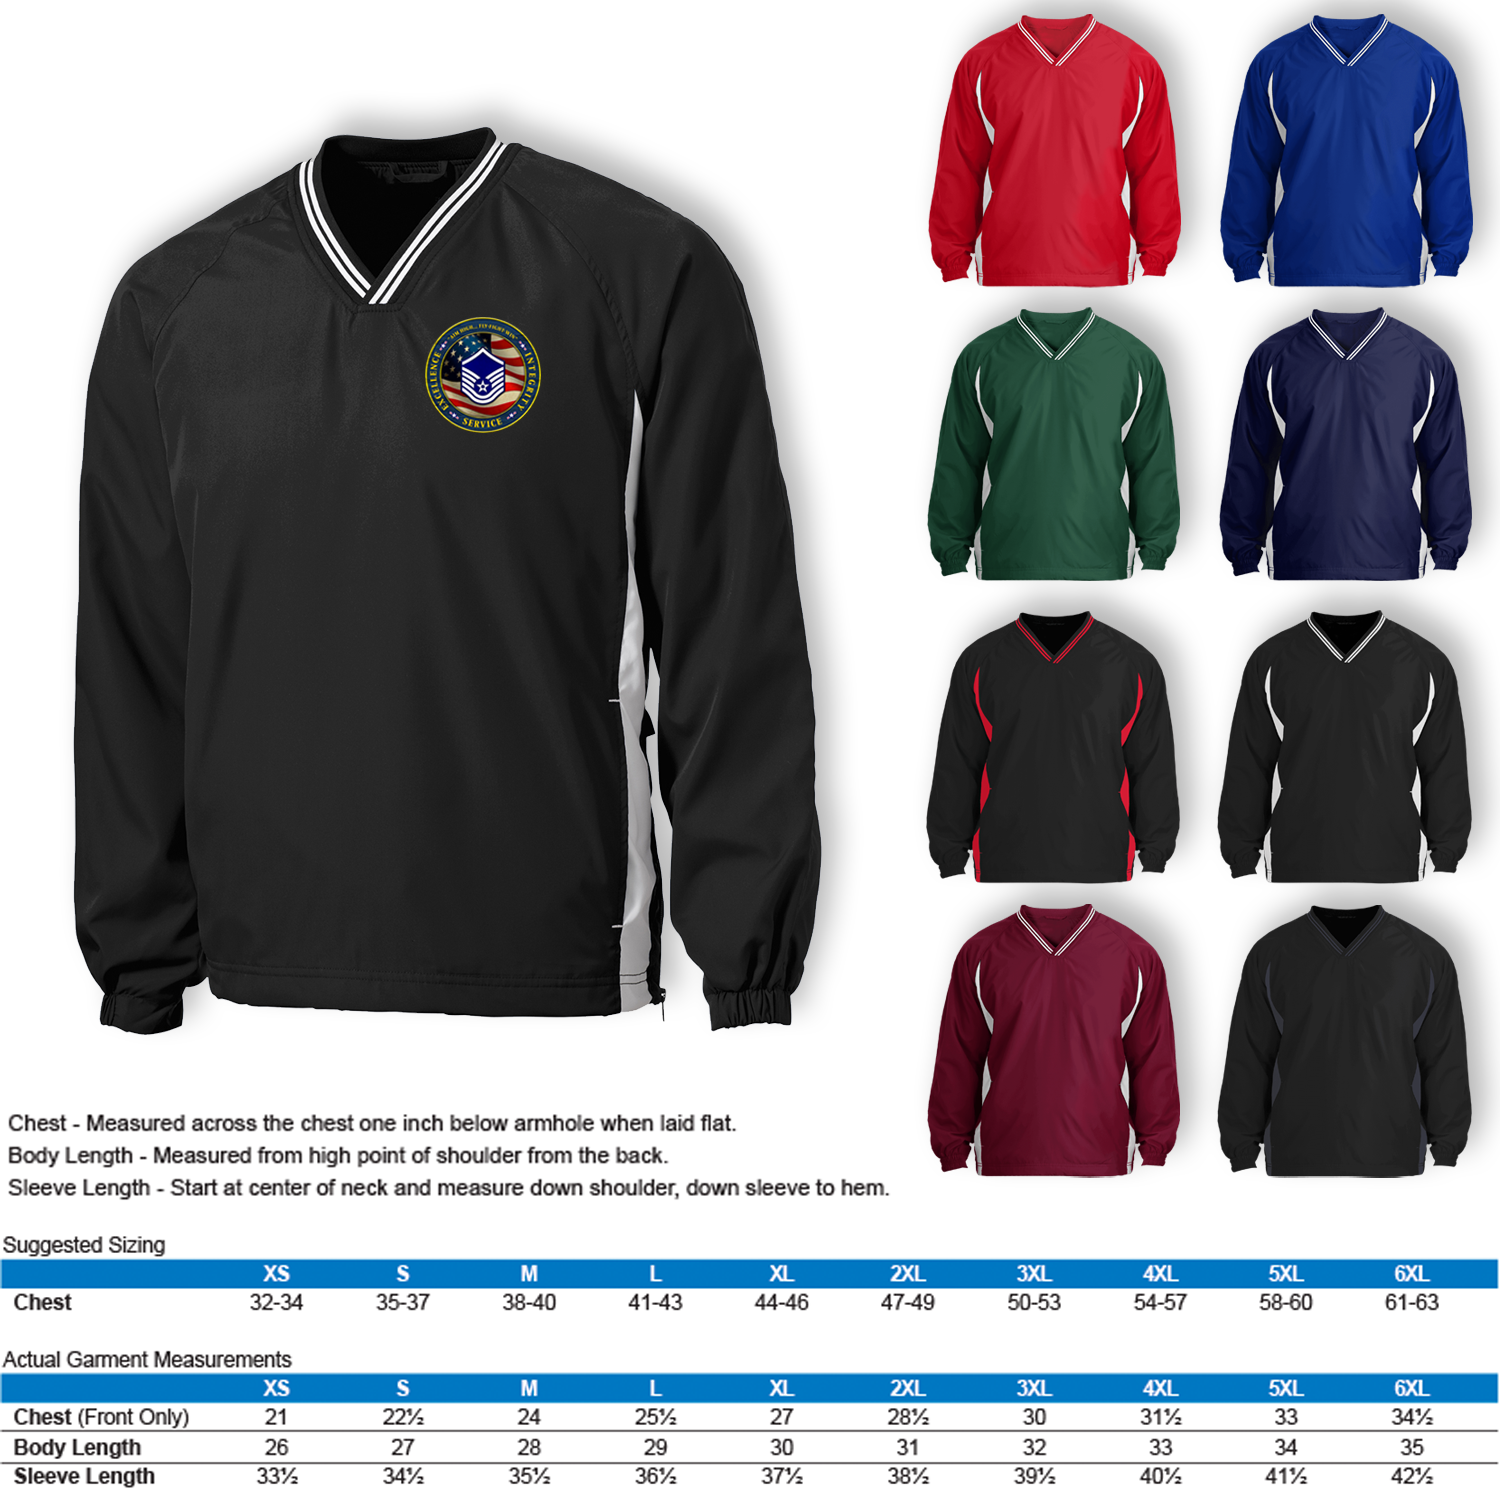 Custom US Air Force Ranks/Insignia Military Mottos, Core Values Print On Left Chest Windshirt